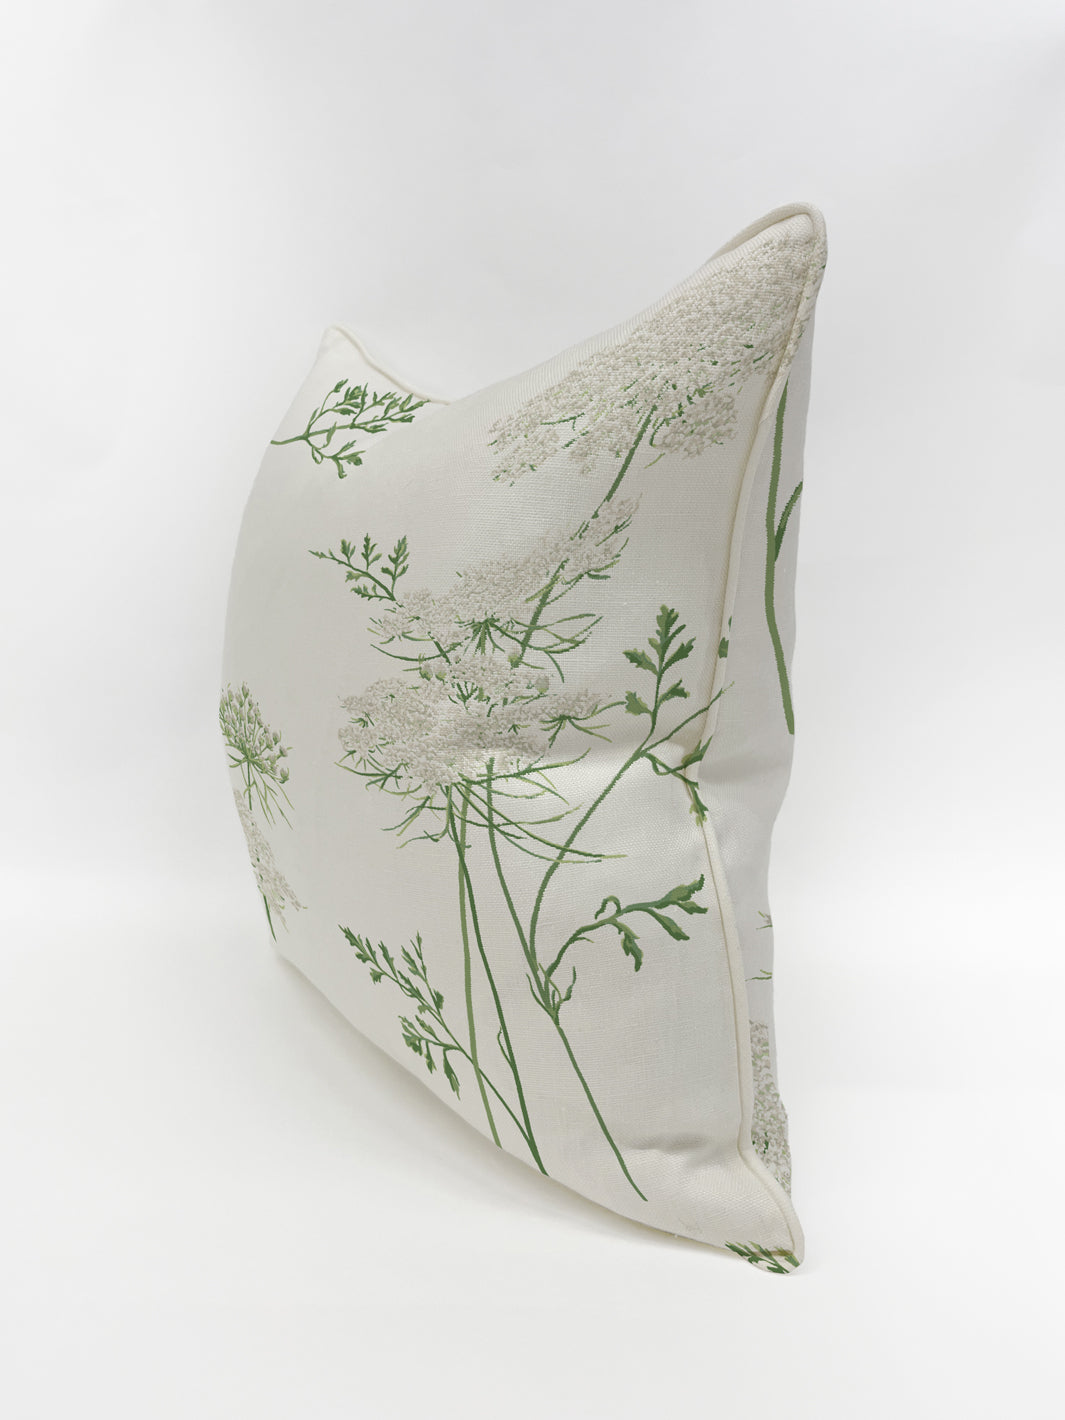 'The Queen's Lace' Pillow by Sarah Jessica Parker - Silver on Linen